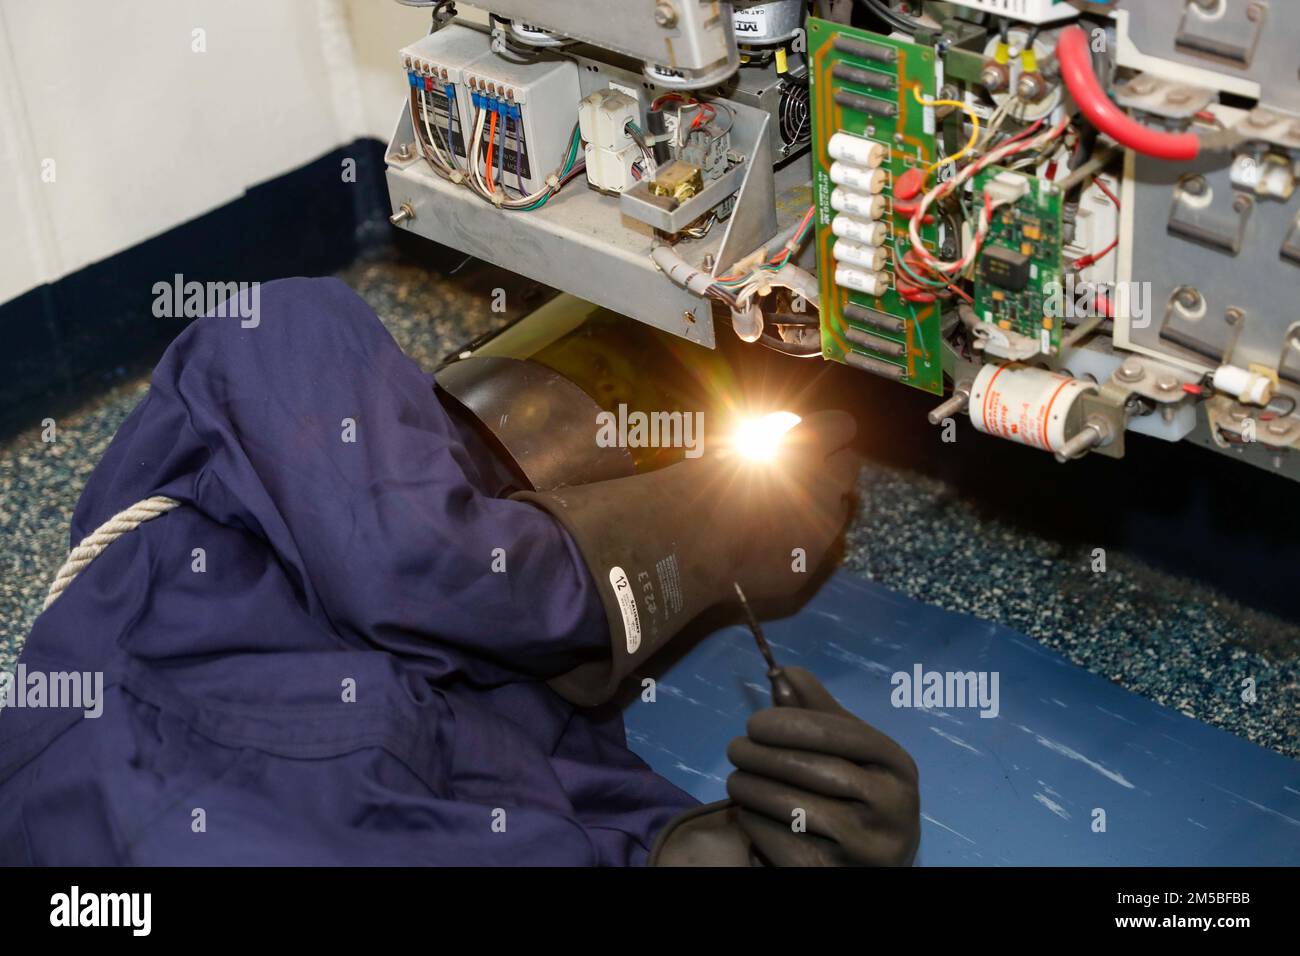 PHILIPPINE SEA (Feb. 22, 2022) Electrician’s Mate 3rd Class Ian Lemyre, from Kalama, Wash., adjusts a potentiometer aboard the Nimitz-class aircraft carrier USS Abraham Lincoln (CVN 72). Abraham Lincoln Strike Group is on a scheduled deployment in the U.S. 7th Fleet area of operations to enhance interoperability through alliances and partnerships while serving as a ready-response force in support of a free and open Indo-Pacific region. Stock Photo